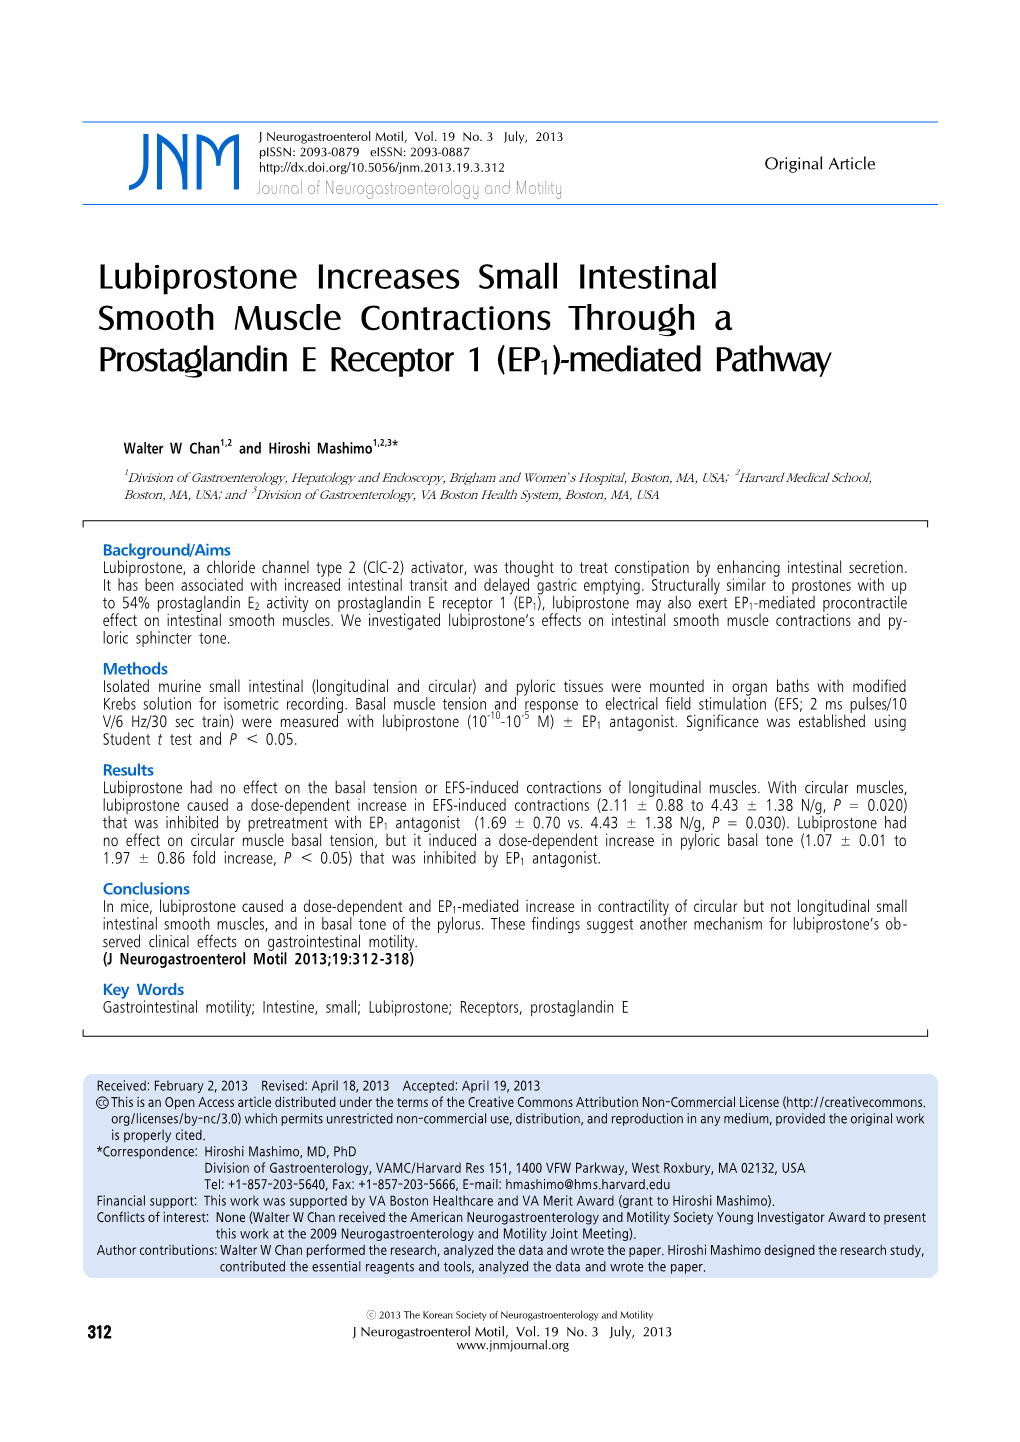 Lubiprostone Increases Small Intestinal Smooth Muscle Contractions Through a Prostaglandin E Receptor 1 (EP1)-Mediated Pathway